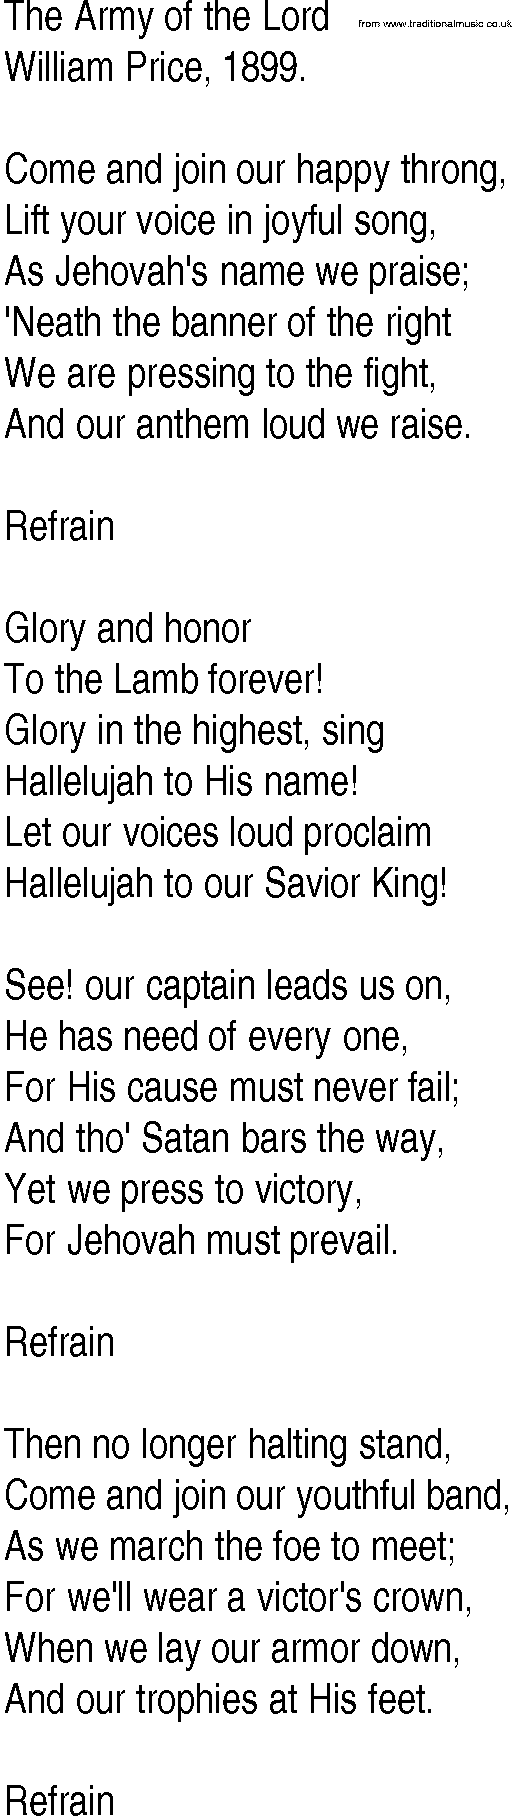 Hymn and Gospel Song: The Army of the Lord by William Price lyrics